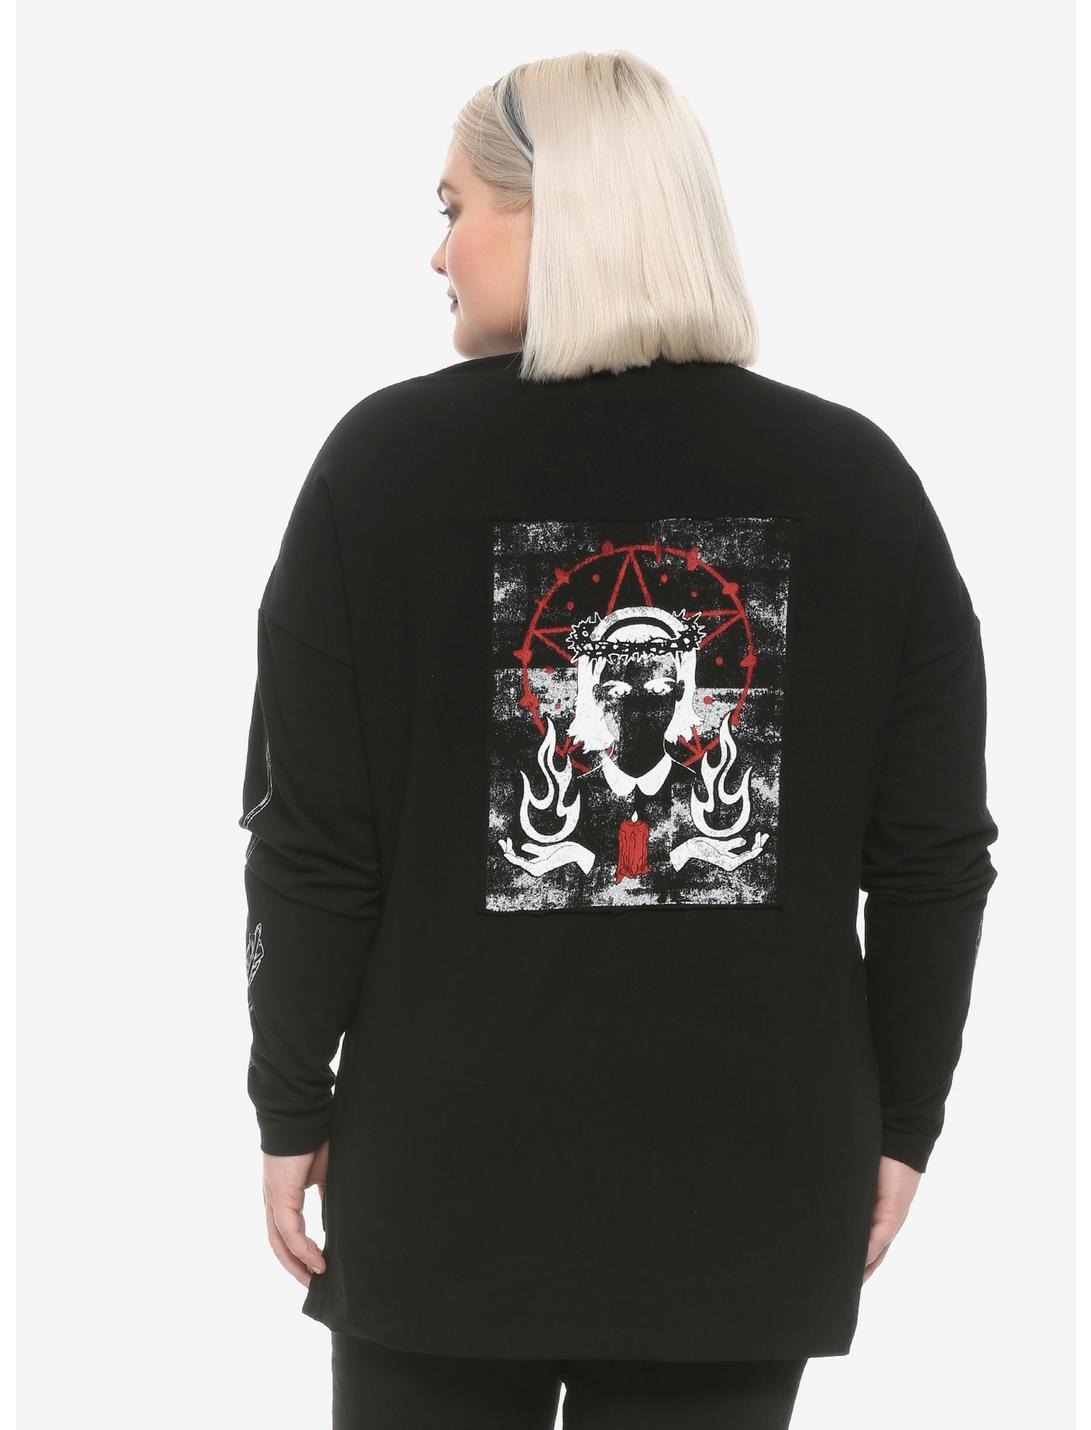 Chilling Adventures Of Sabrina Herald Of Hell Half-Zipper Girls Long-Sleeve T-Shirt Plus Size, MULTI, hi-res